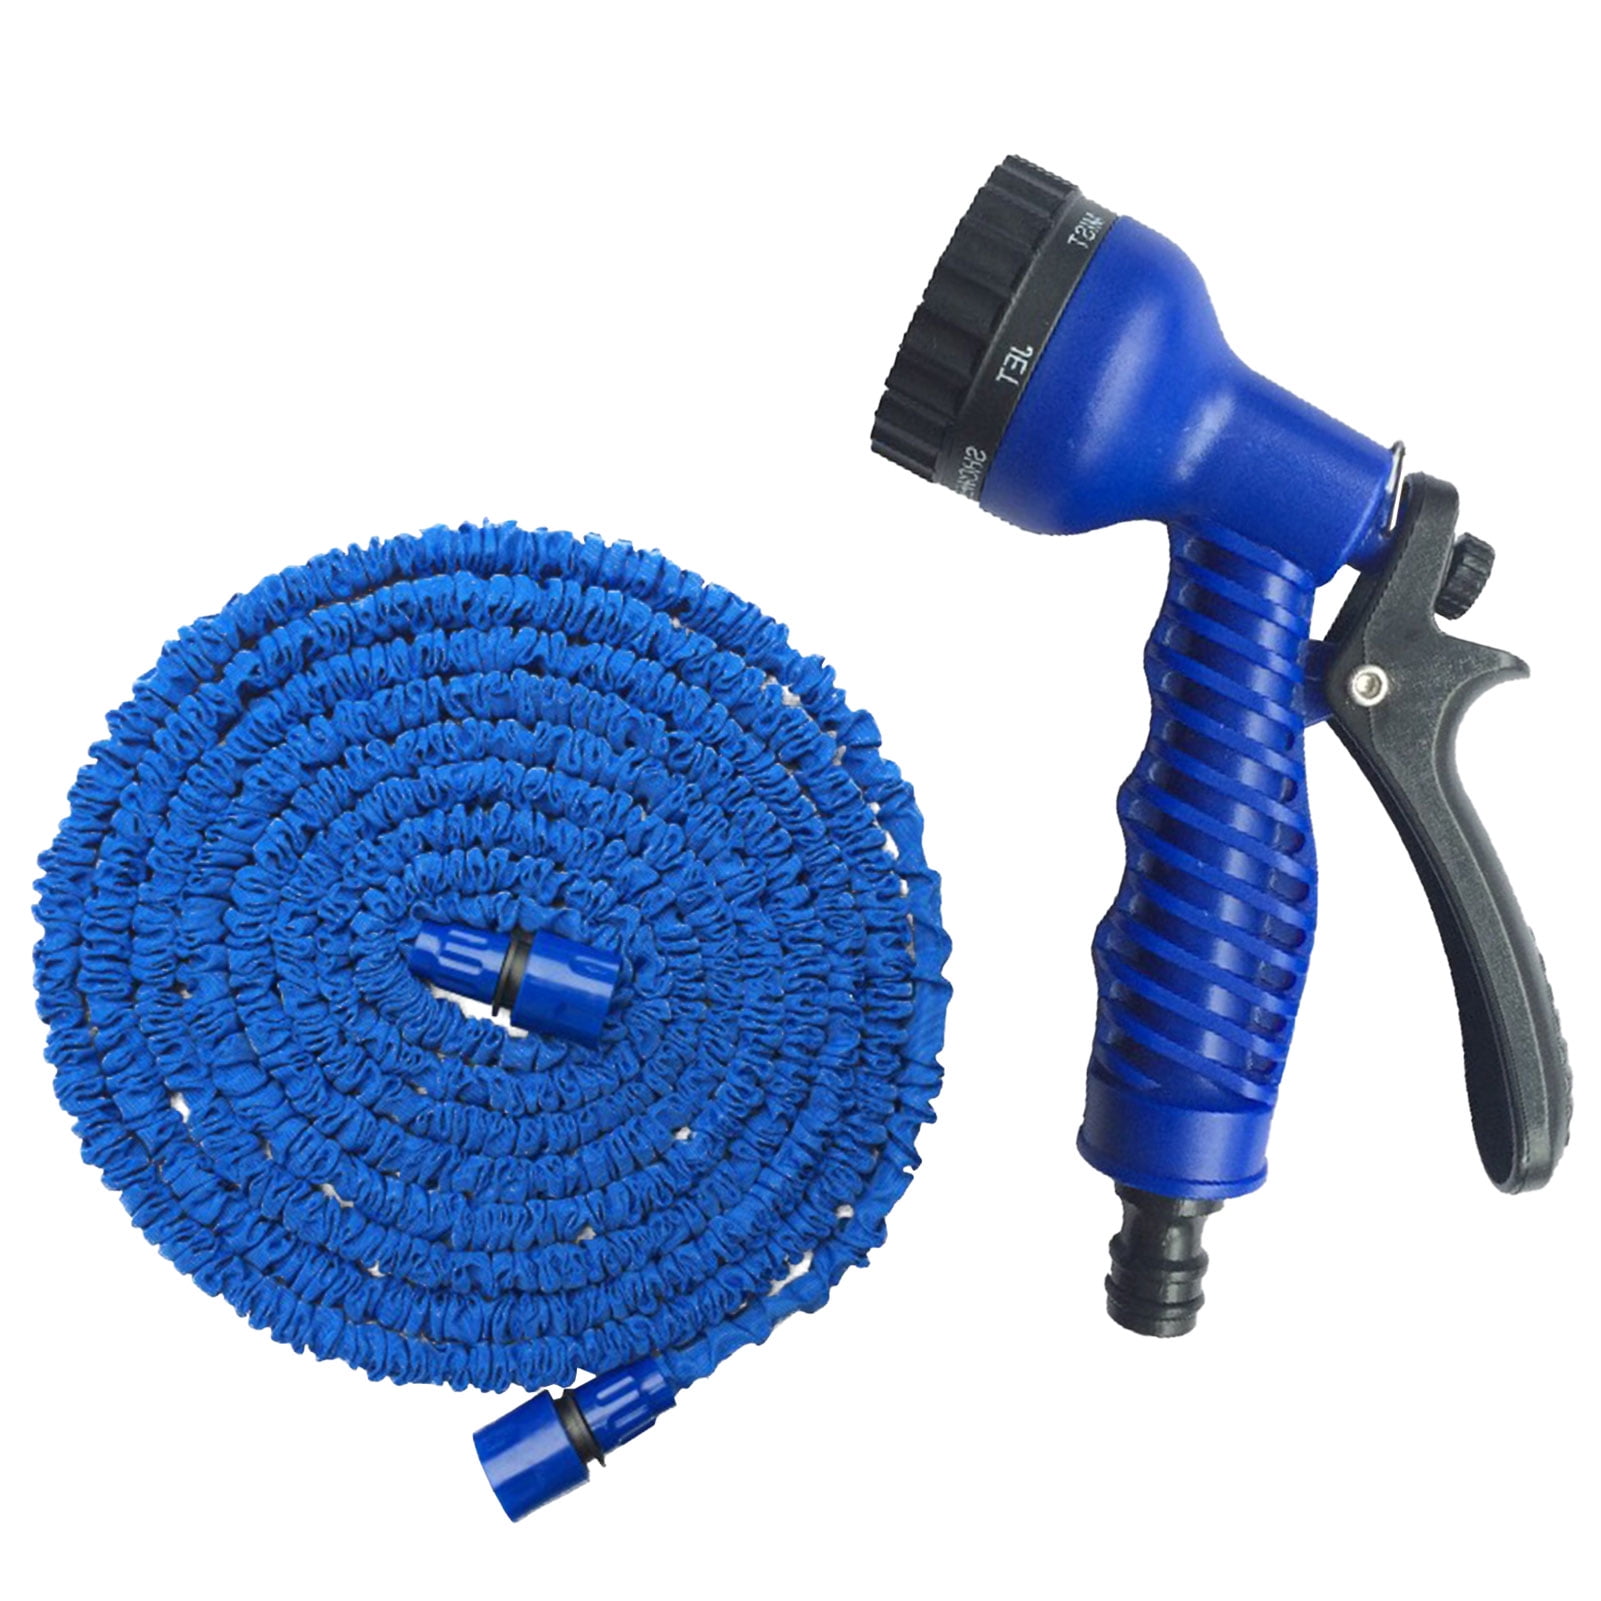 Details about   Quick Connection Multi Function Spray Gun Garden Hose Pipe Watering Hosepipe 